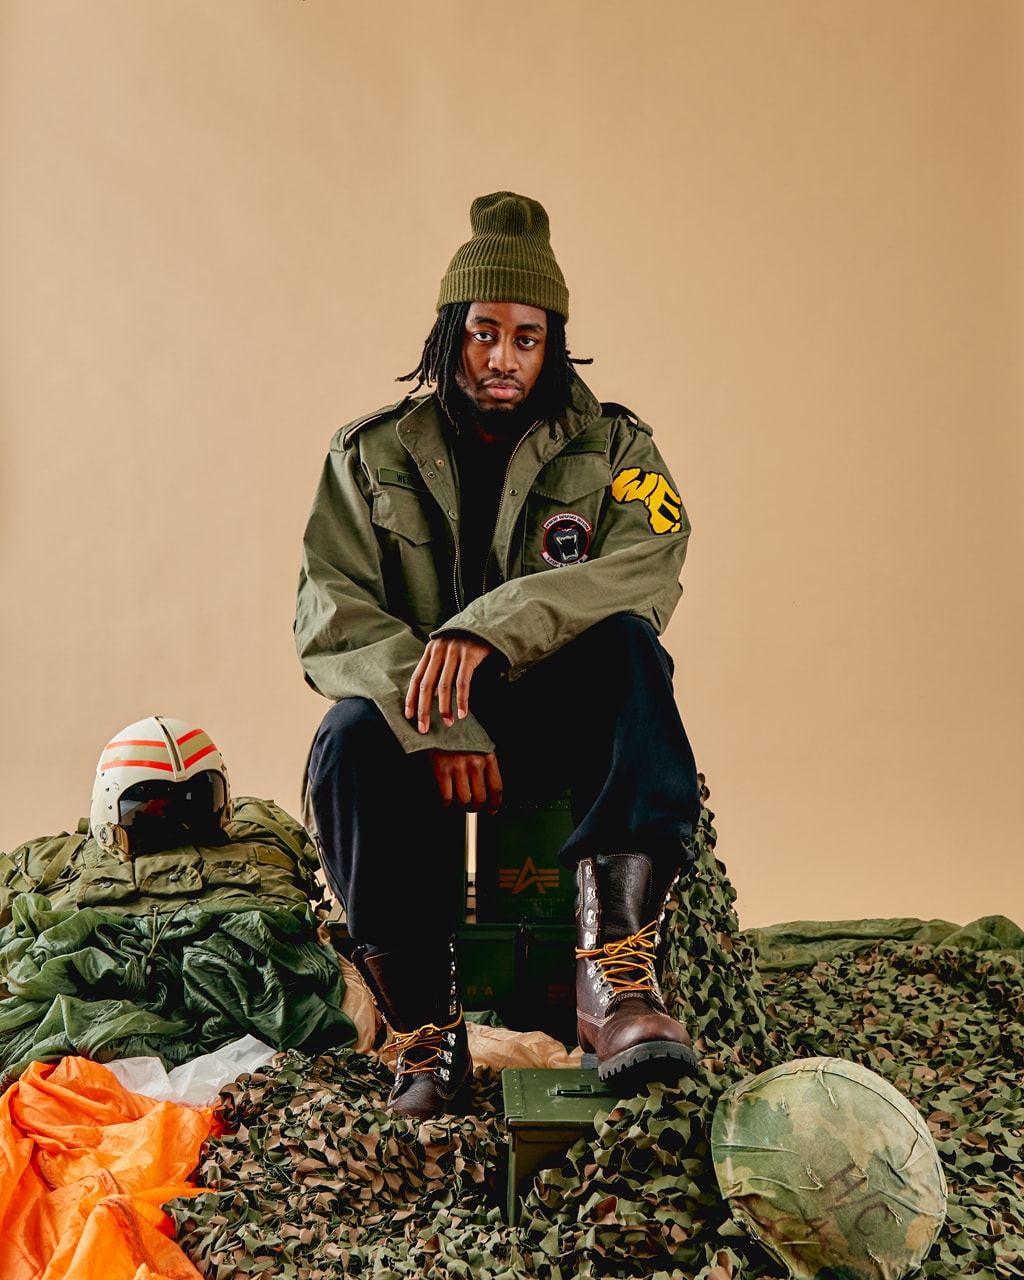 Western Elders and Alpha Industries Join Forces for "African Diaspora Defense Group" Collection